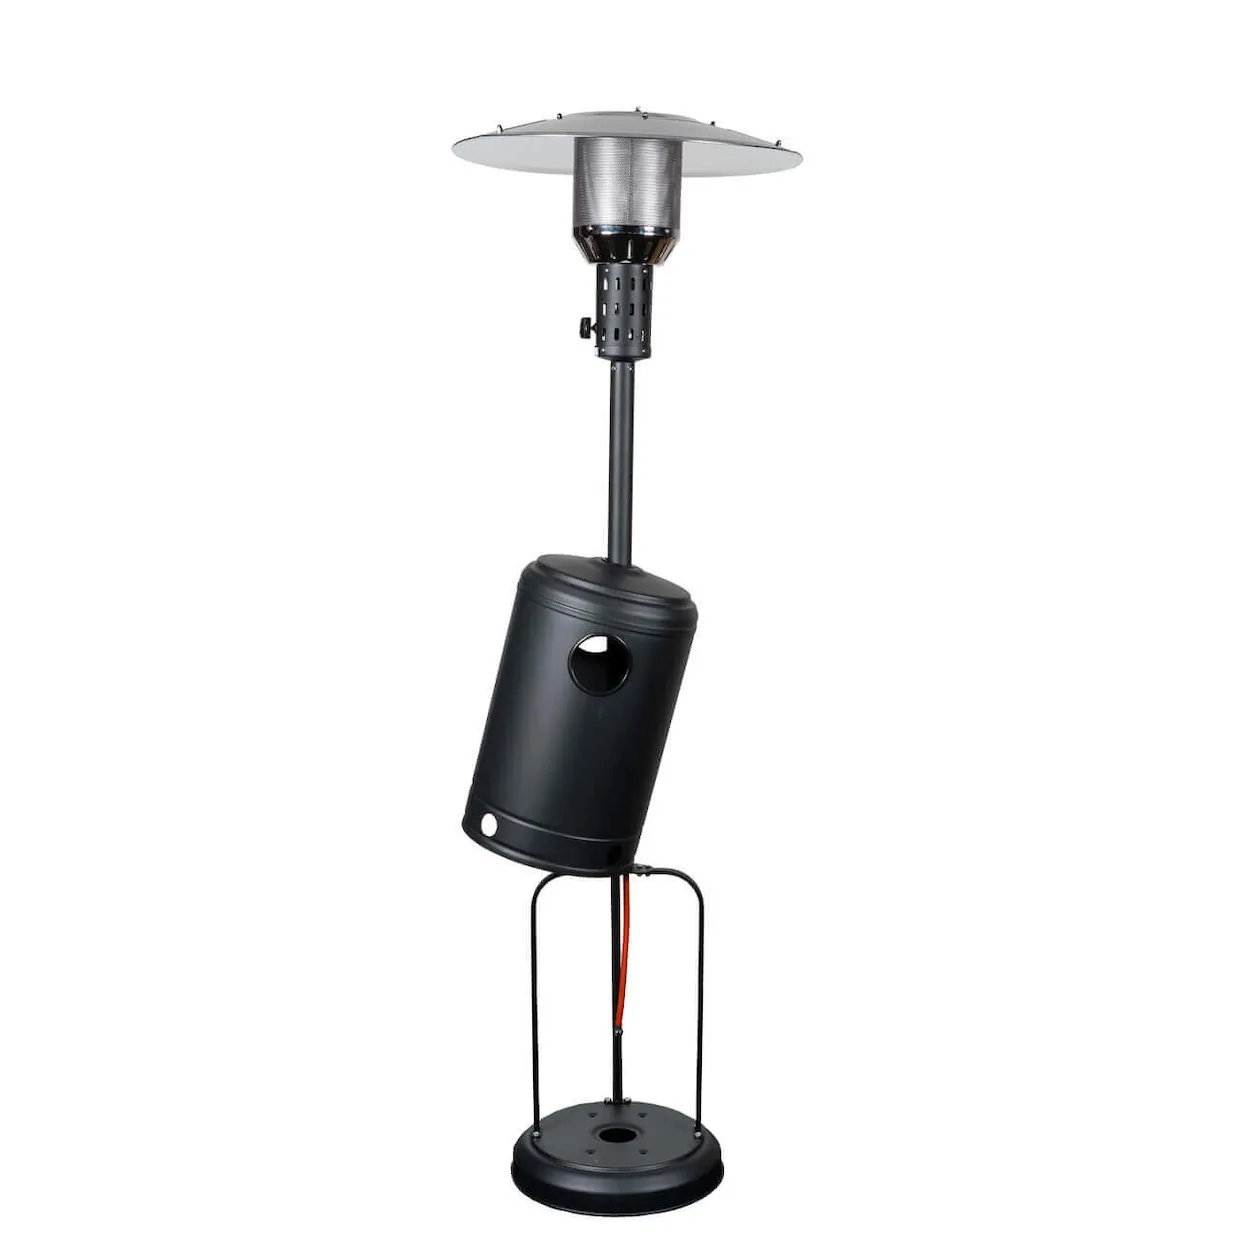 Eurom THG 10000 BE Patioheater